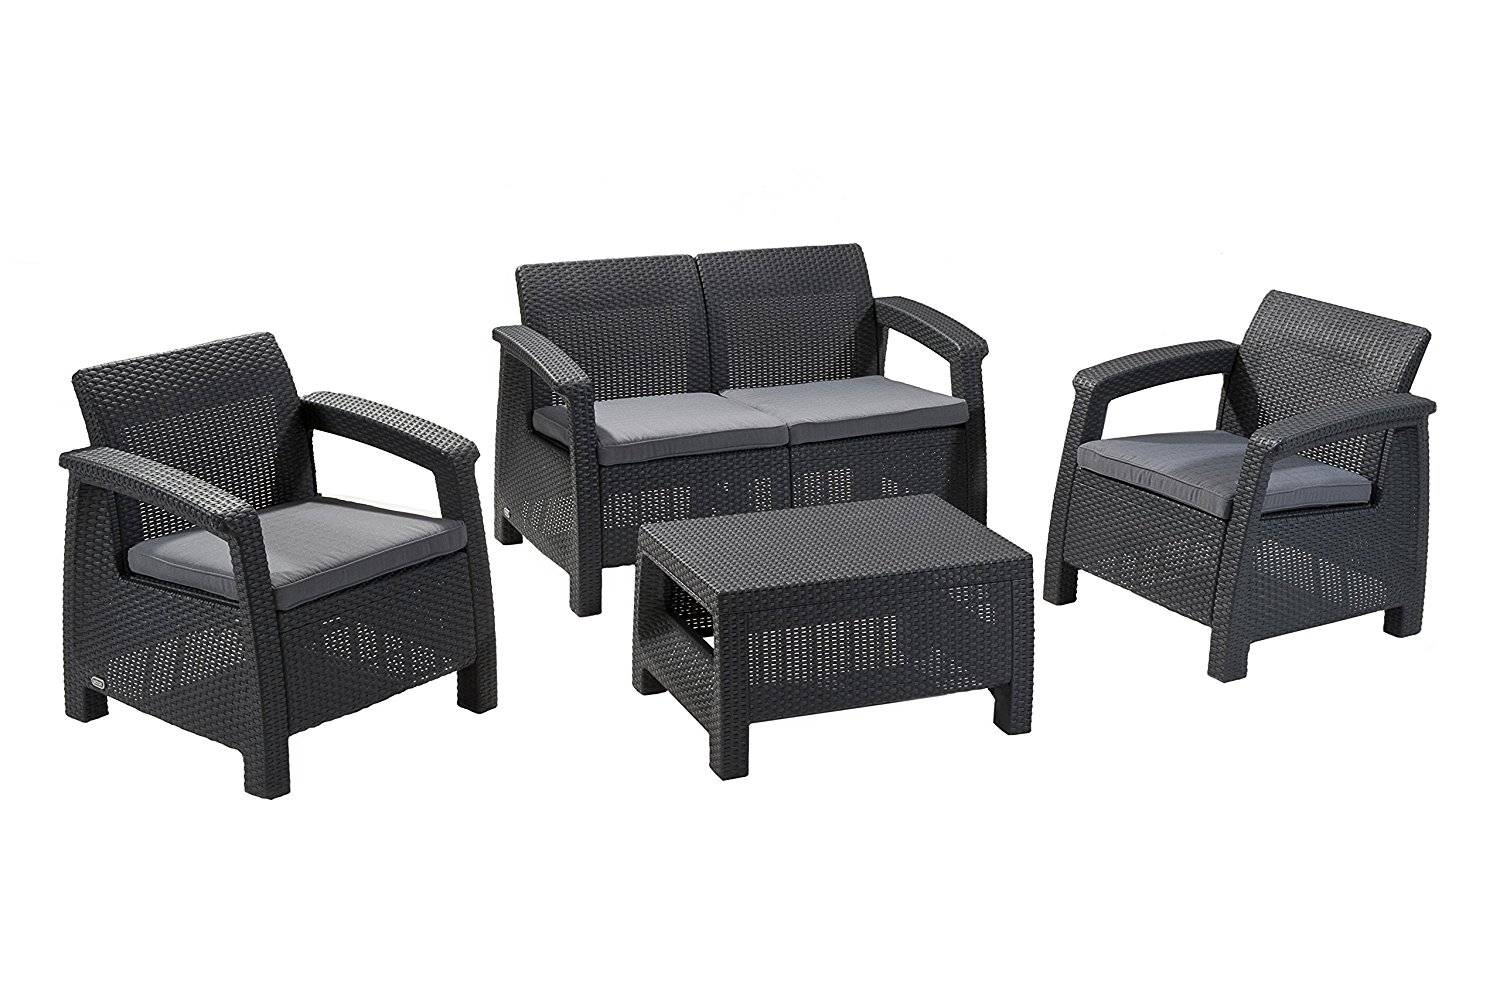 Keter Corfu 4 Piece All Weather Cushioned Outdoor Furniture Set